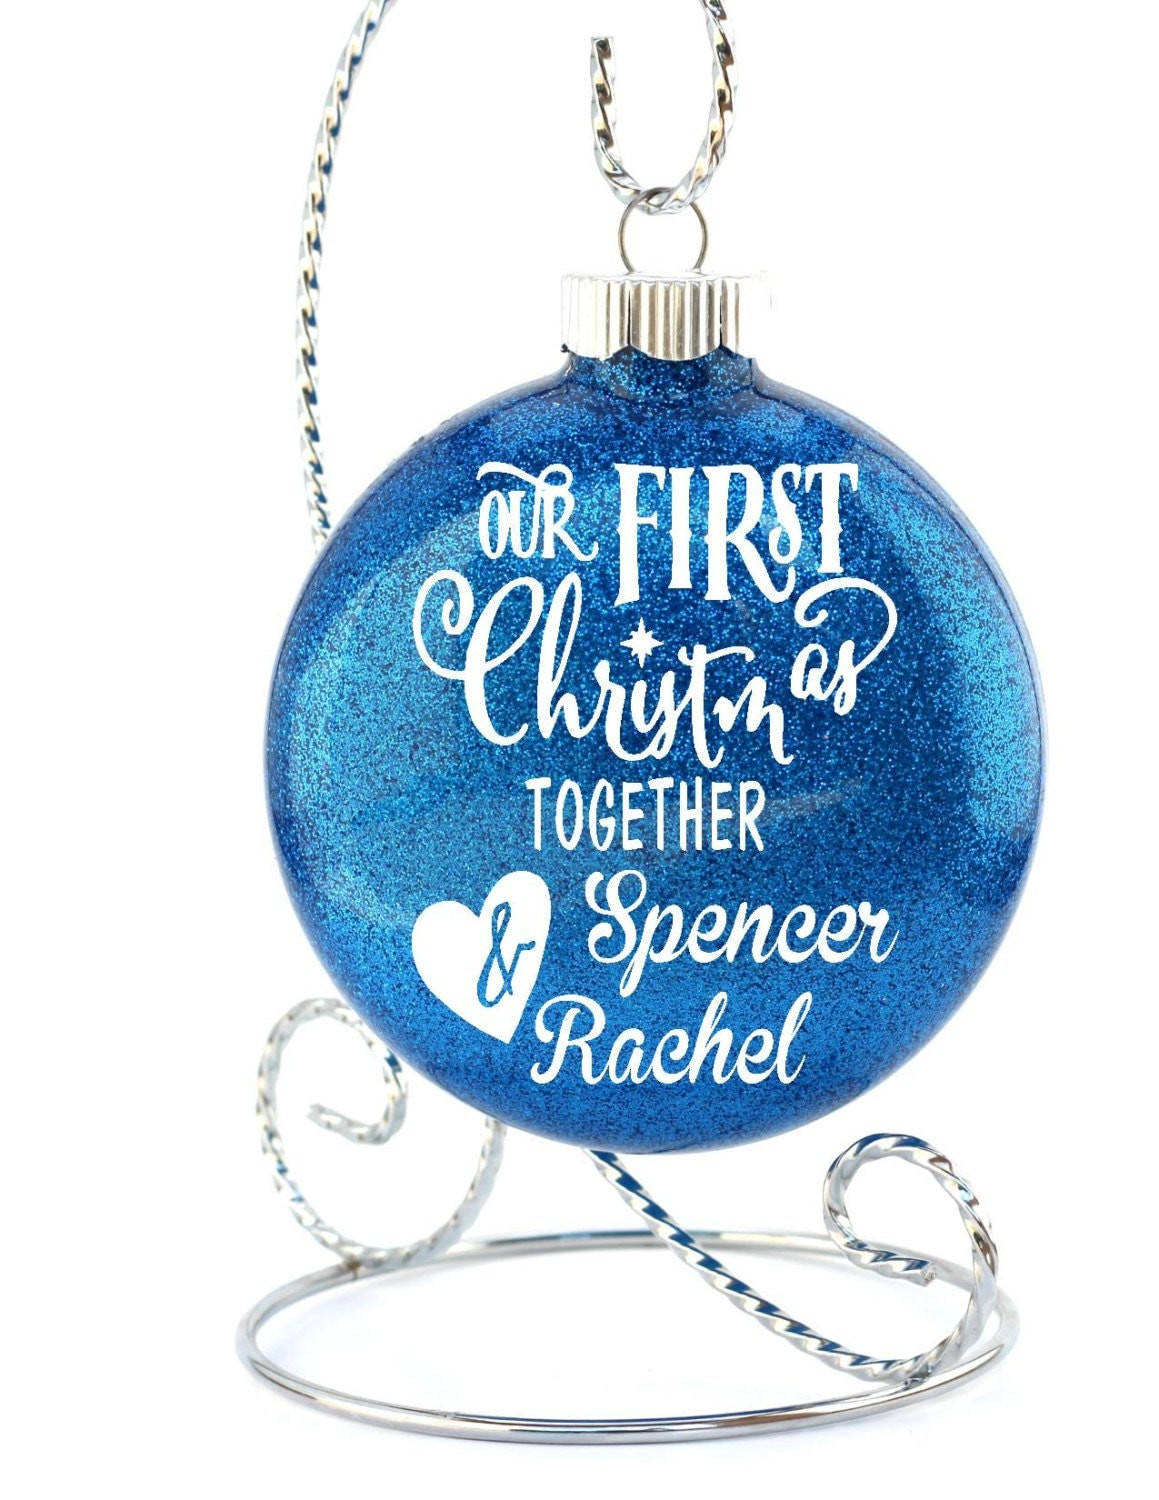 Couple'S First Christmas Gift Ideas
 Our First Christmas To her Couples Ornament Ornament